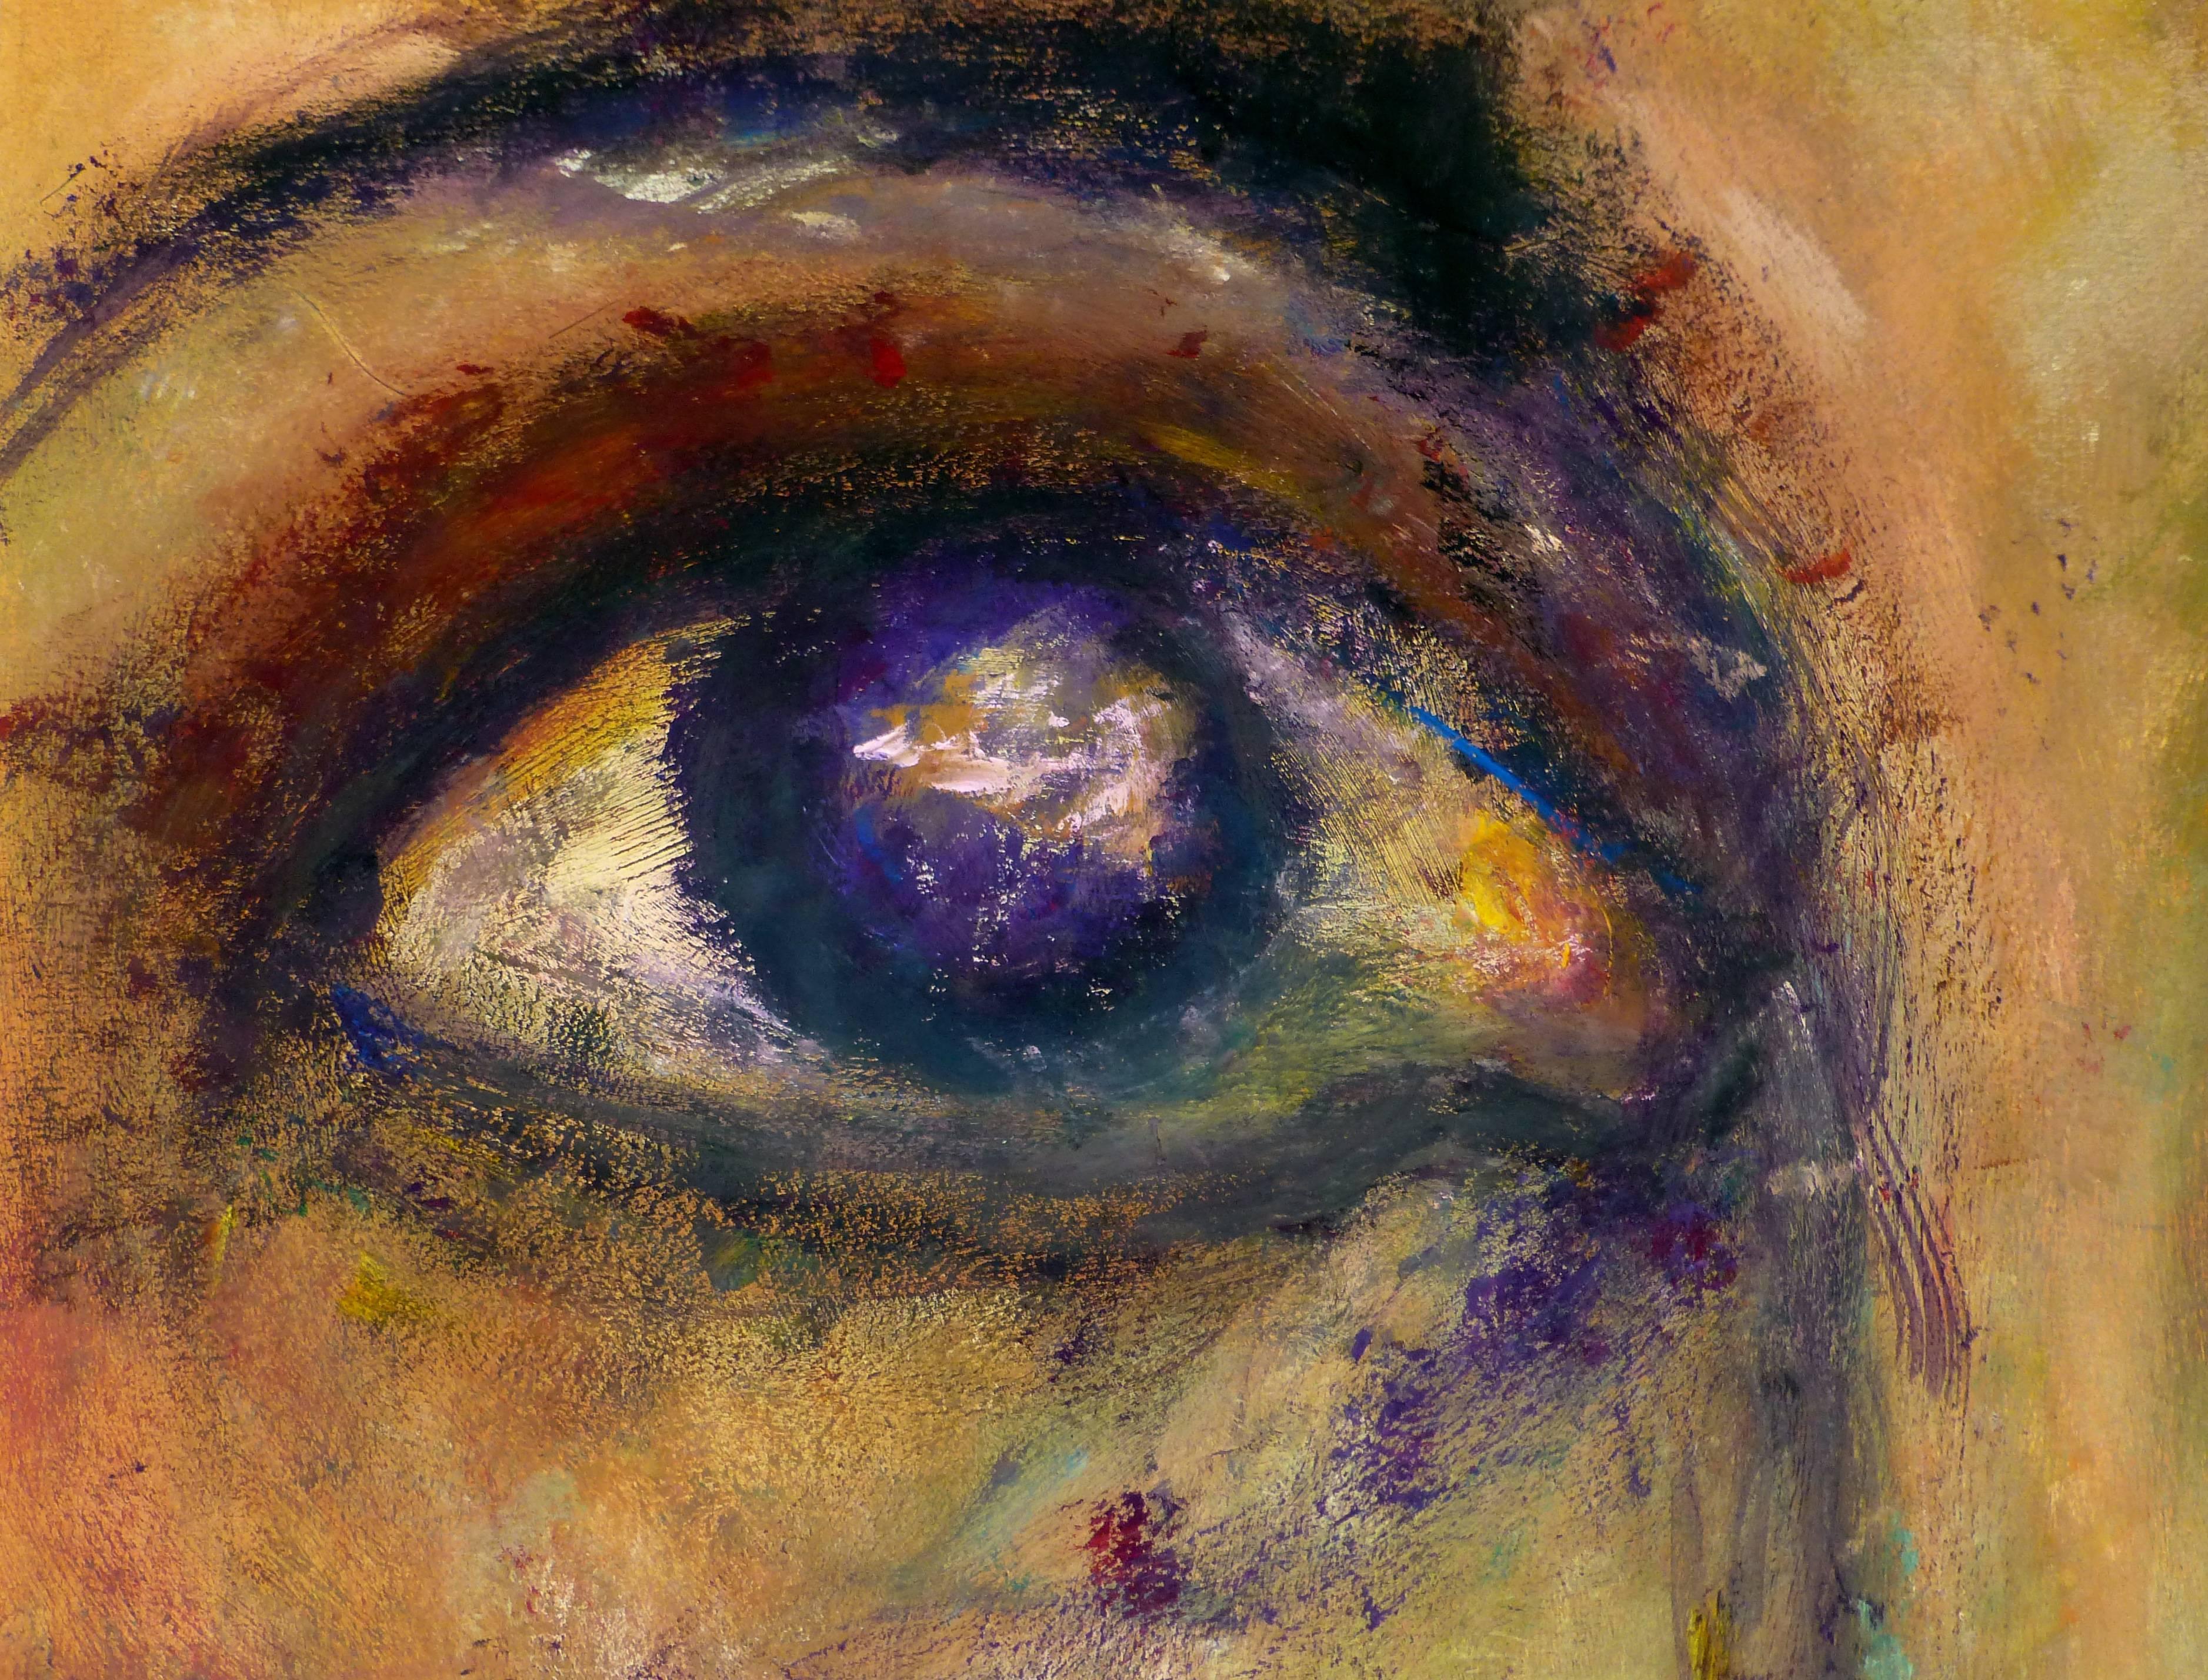 Close Up of Eyes in Oil - Painting by Unknown